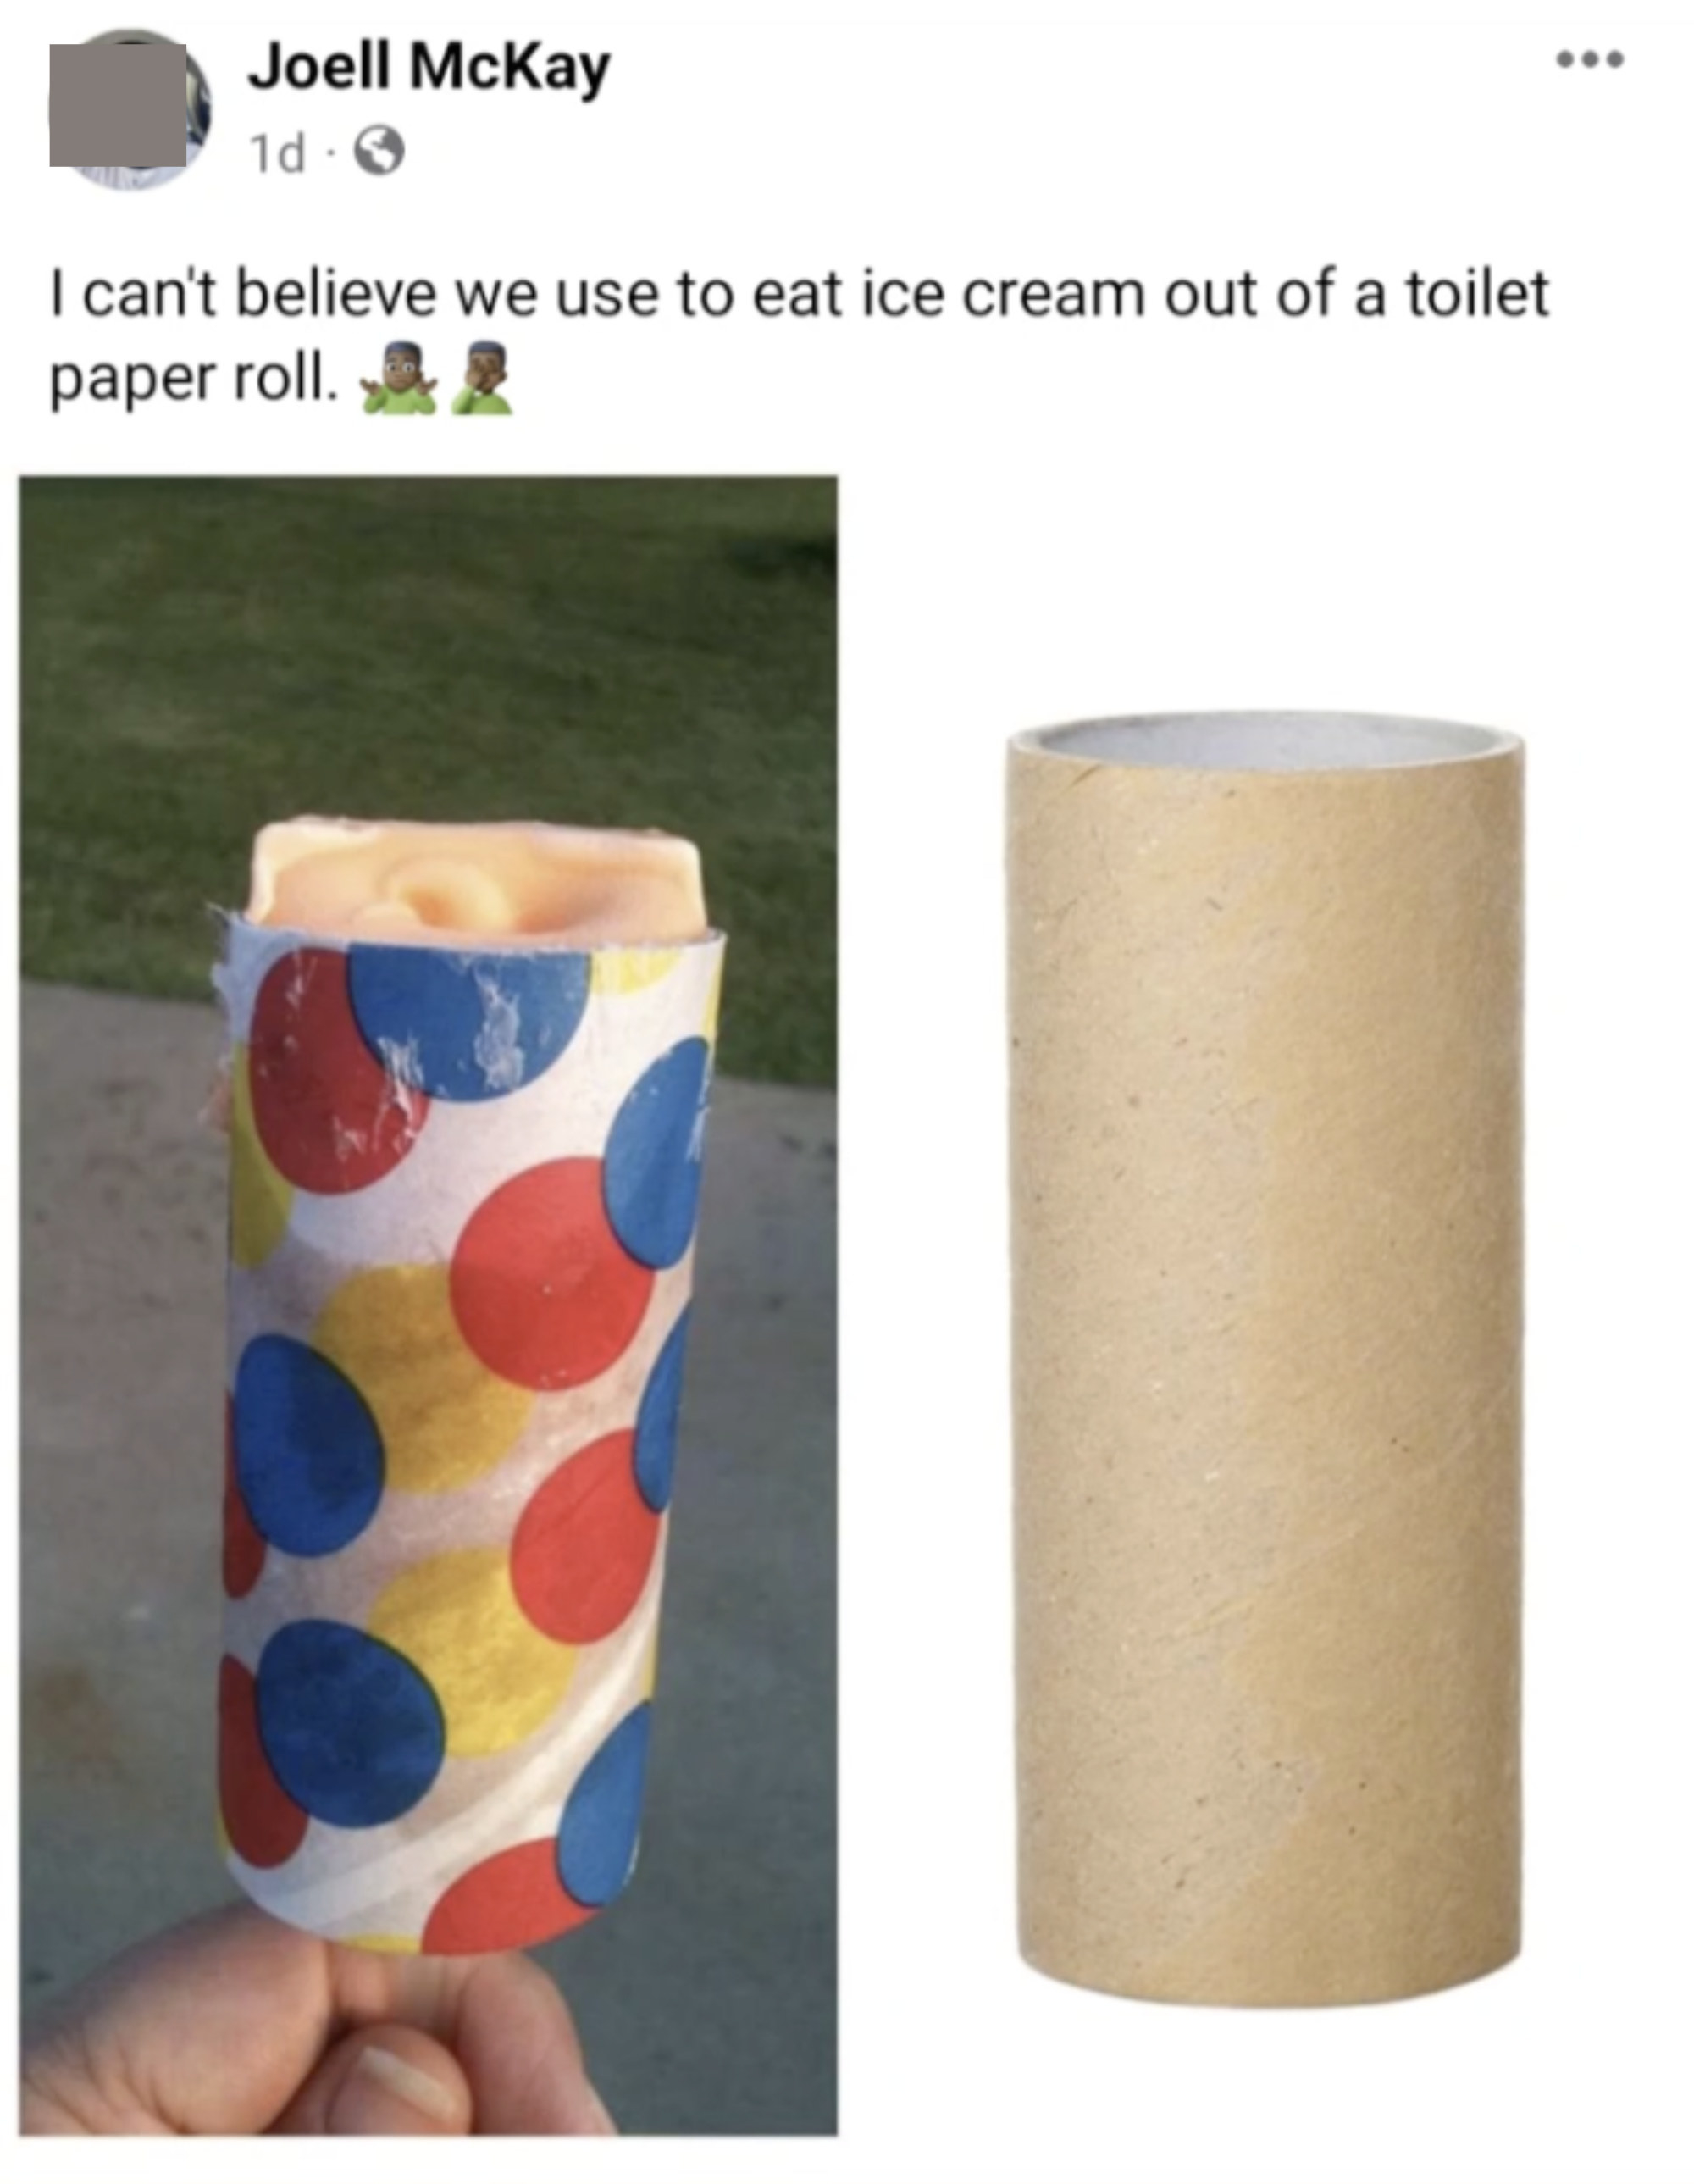 A push pop side-by-side with a toilet paper roll